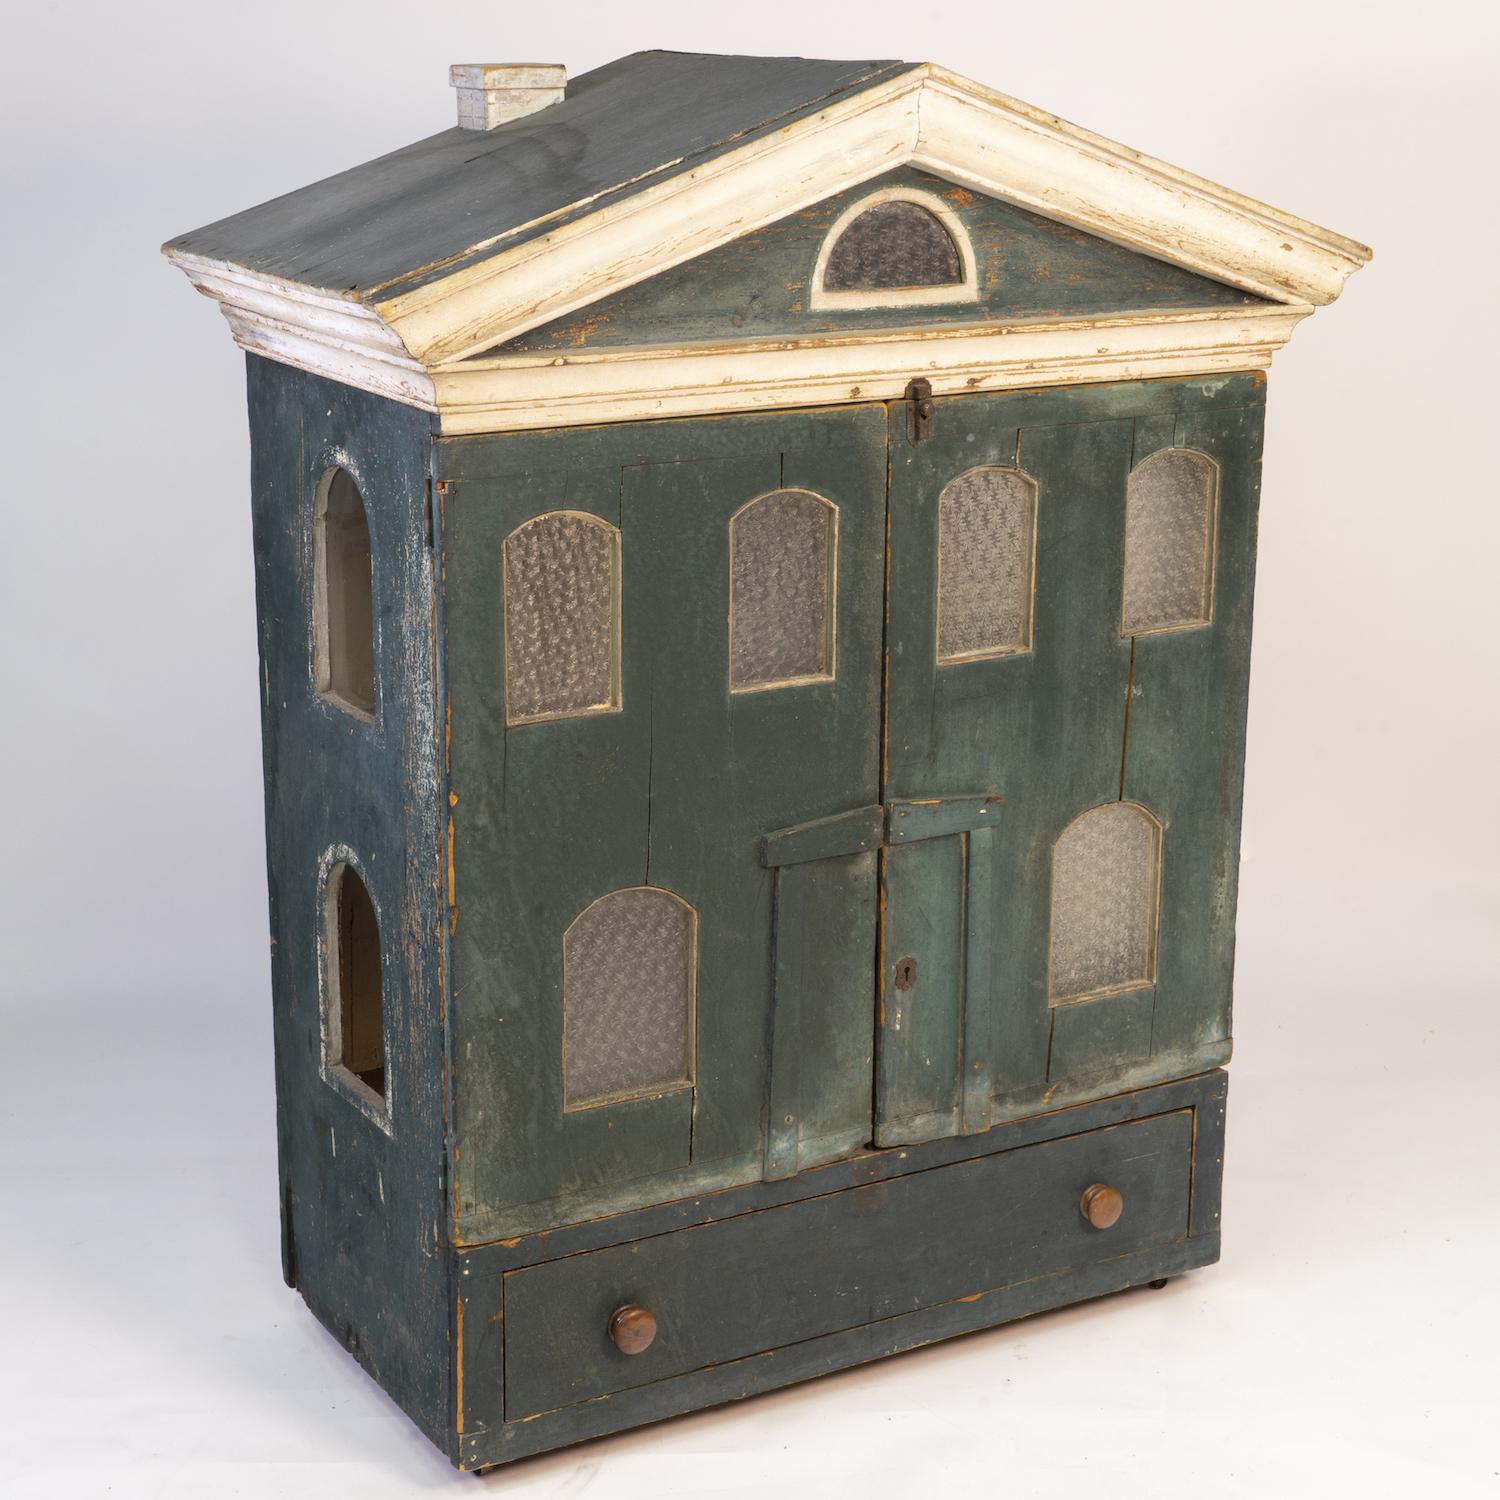 Doll house cabinet, 19th century. Painted pine Greek revival doll house cabinet with four room cubbys and lower drawer. Cabinet is on four casters.
   